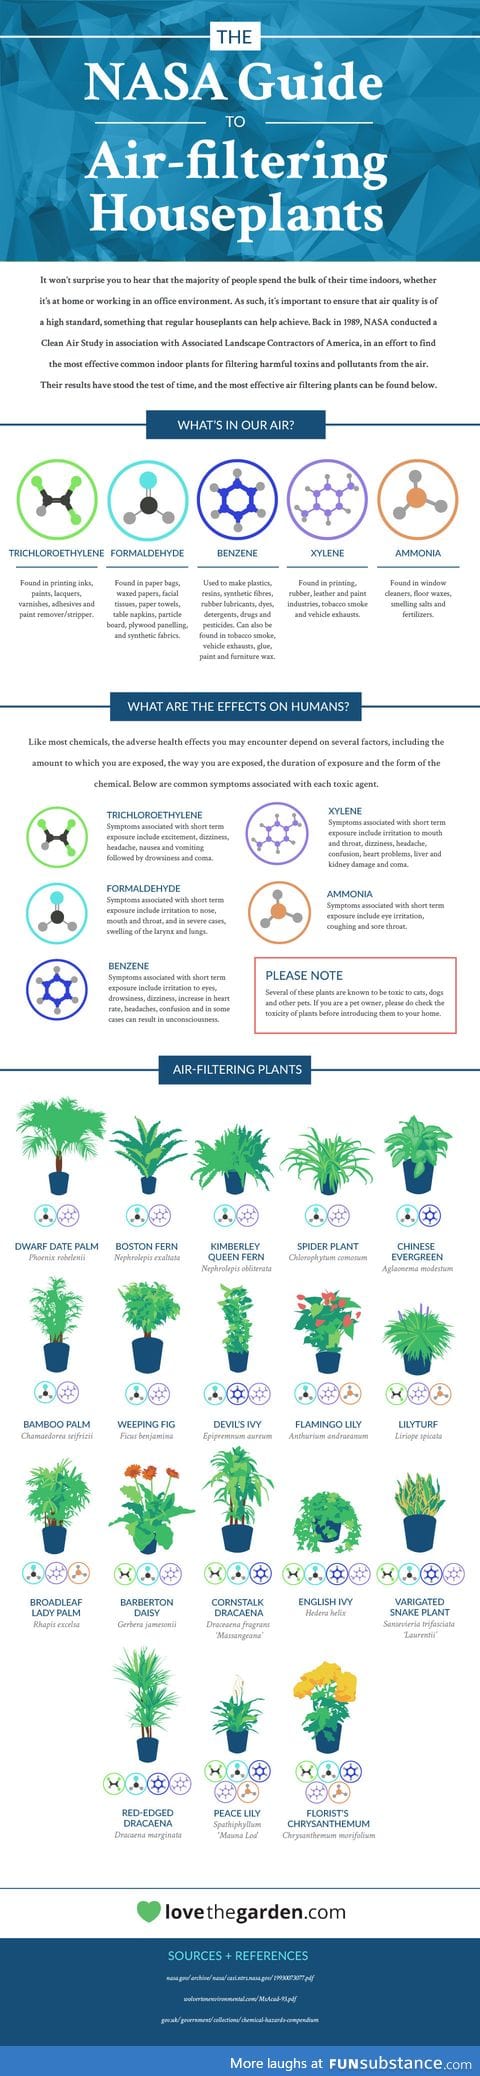 NASA: These 18 Houseplants Help Purify Your Home's Air